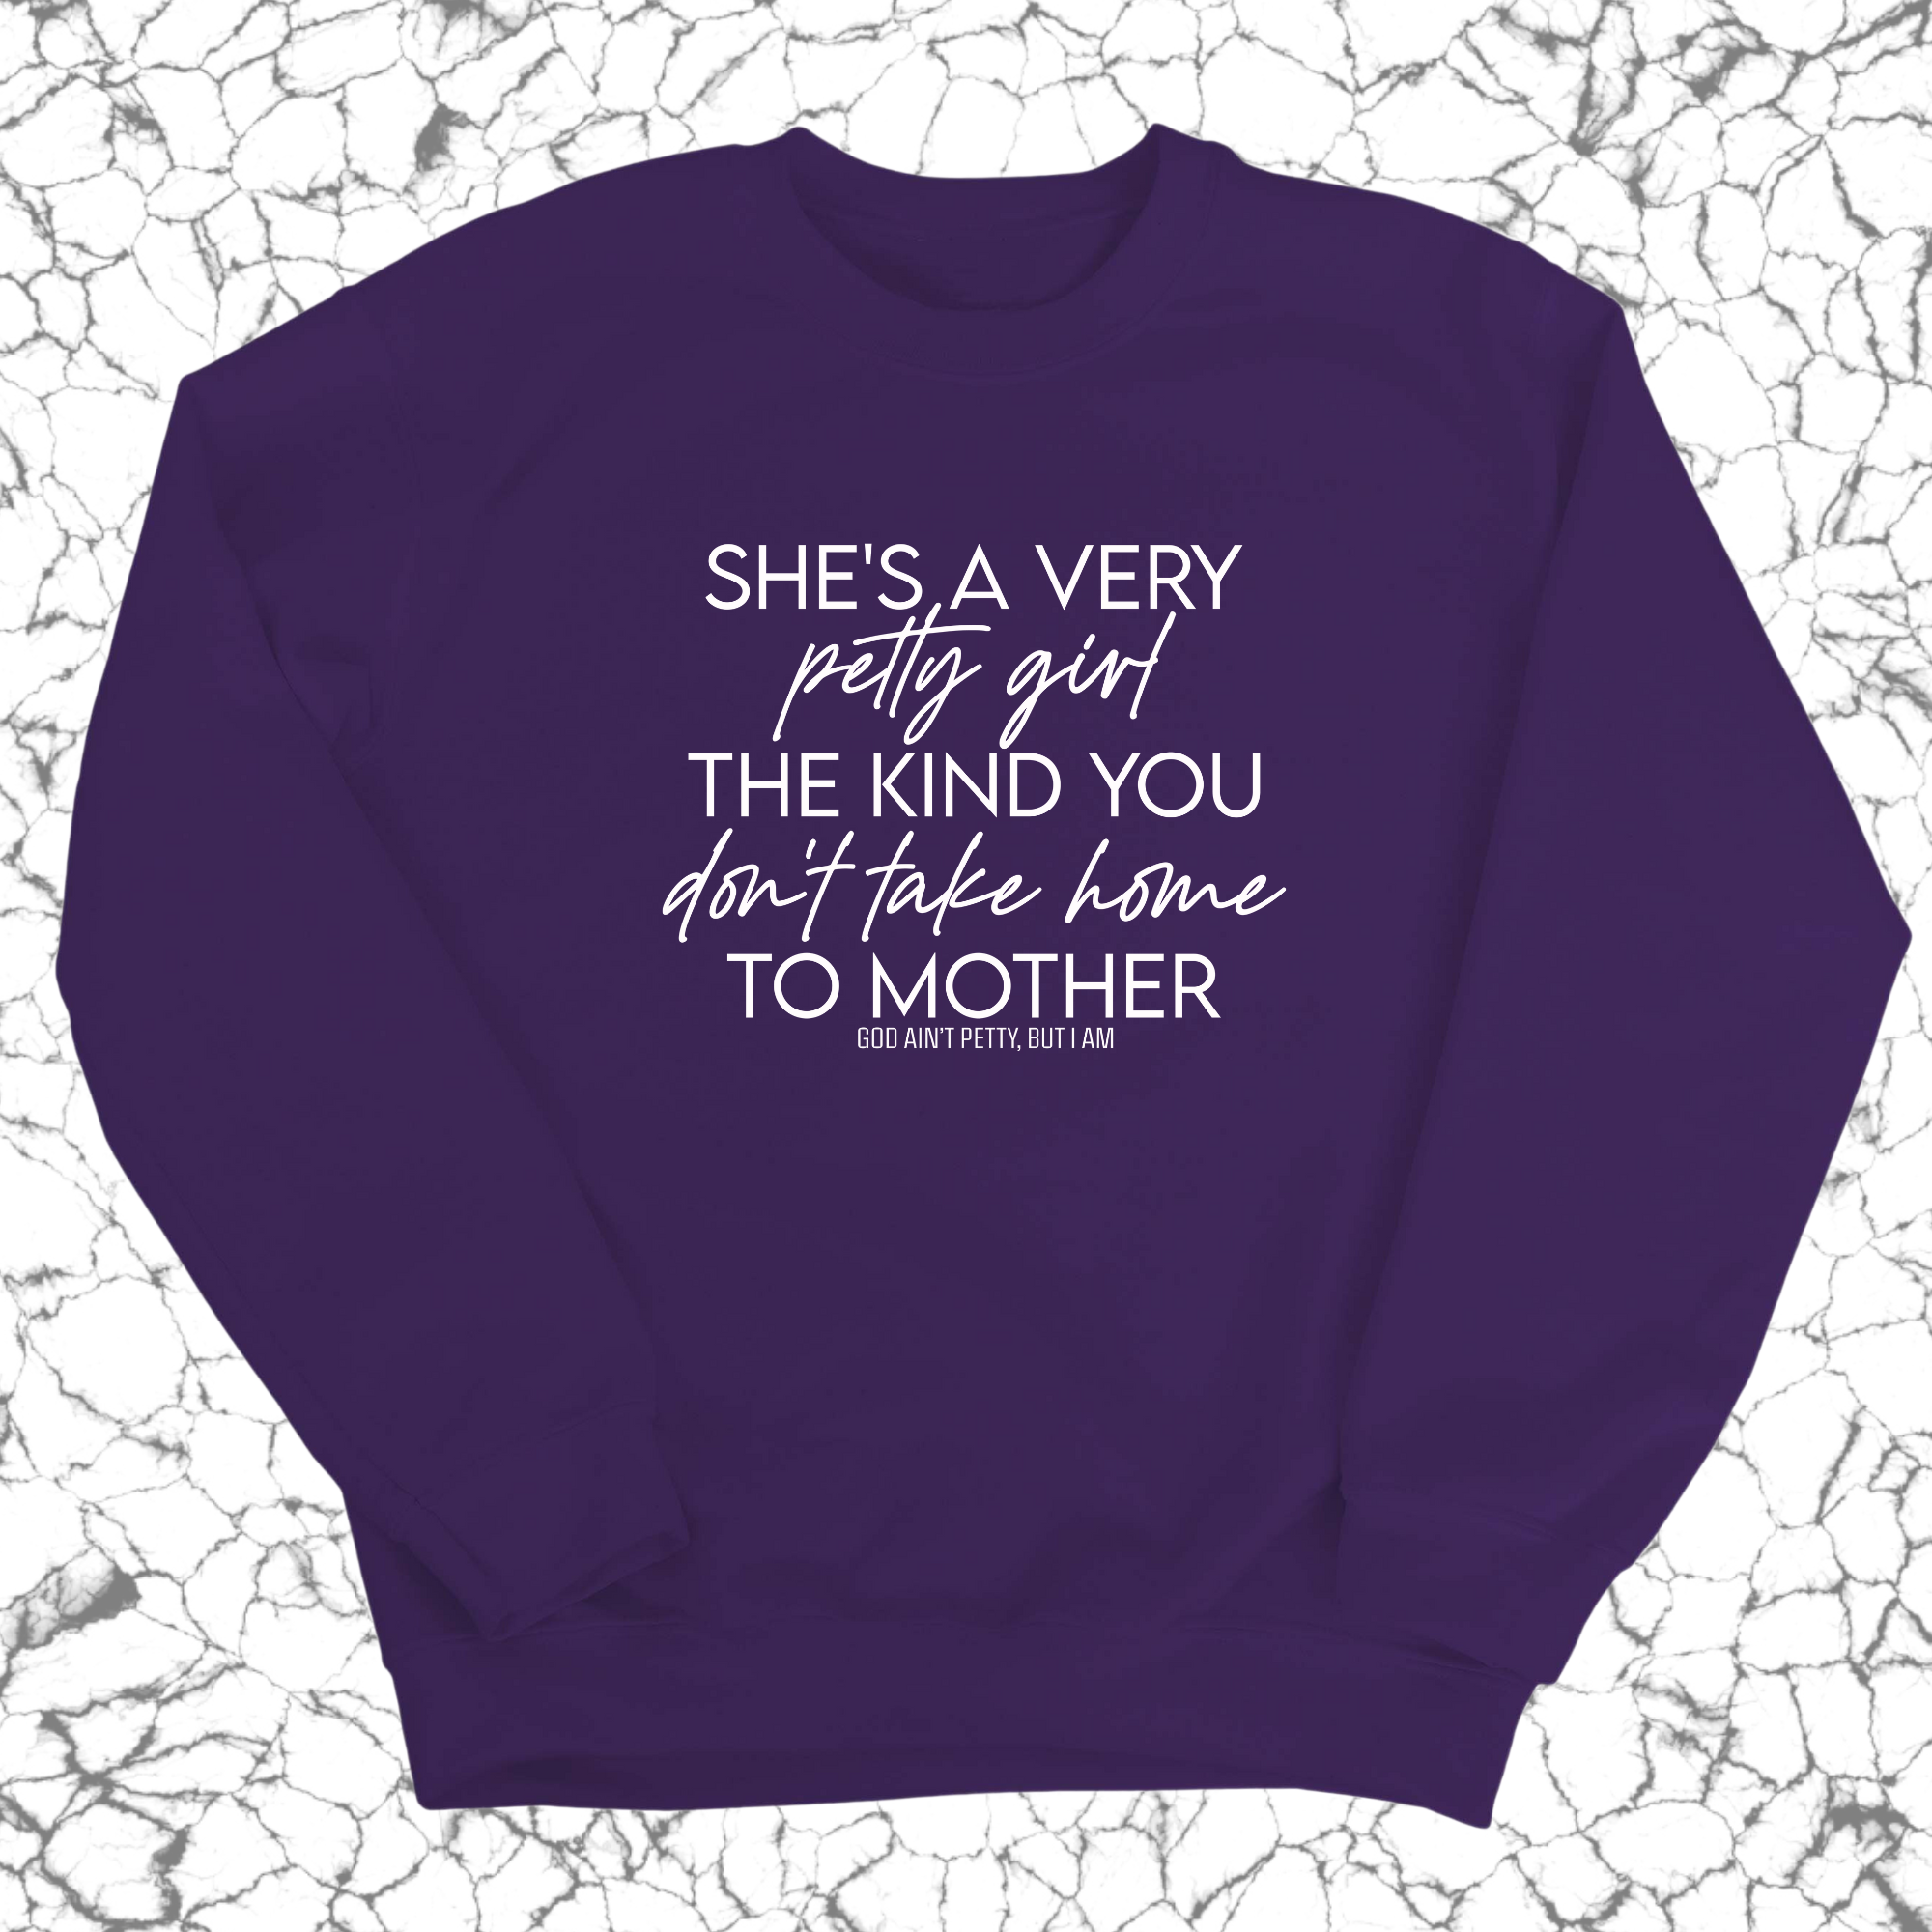 She's a very petty girl the kind you don't take home to mother Unisex Sweatshirt-Sweatshirt-The Original God Ain't Petty But I Am